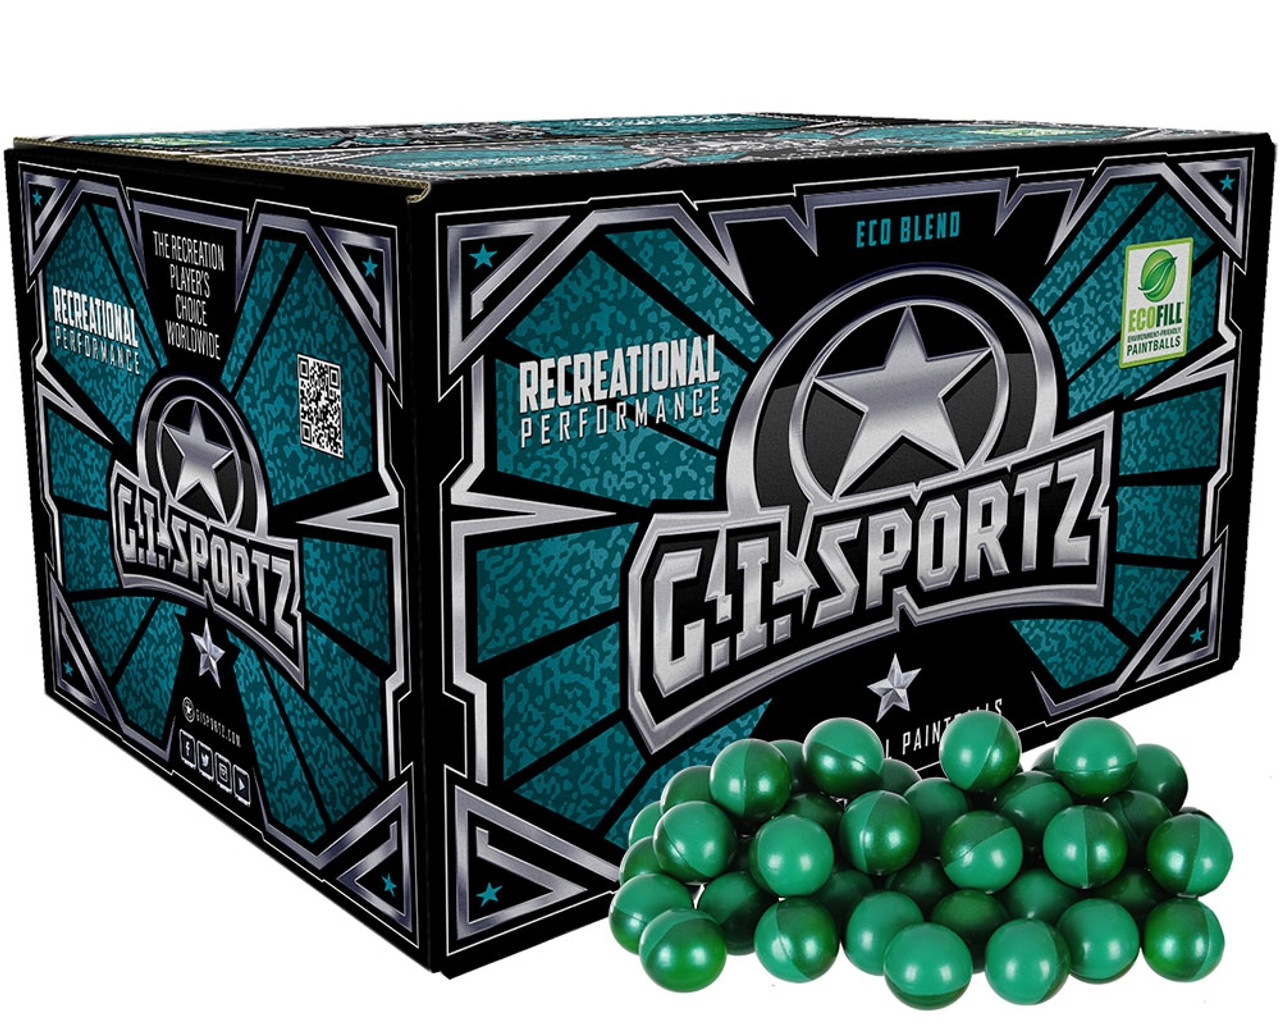 Zap Attak 2000ct 68cal Paintballs with Green Shell, Yellow Fill 